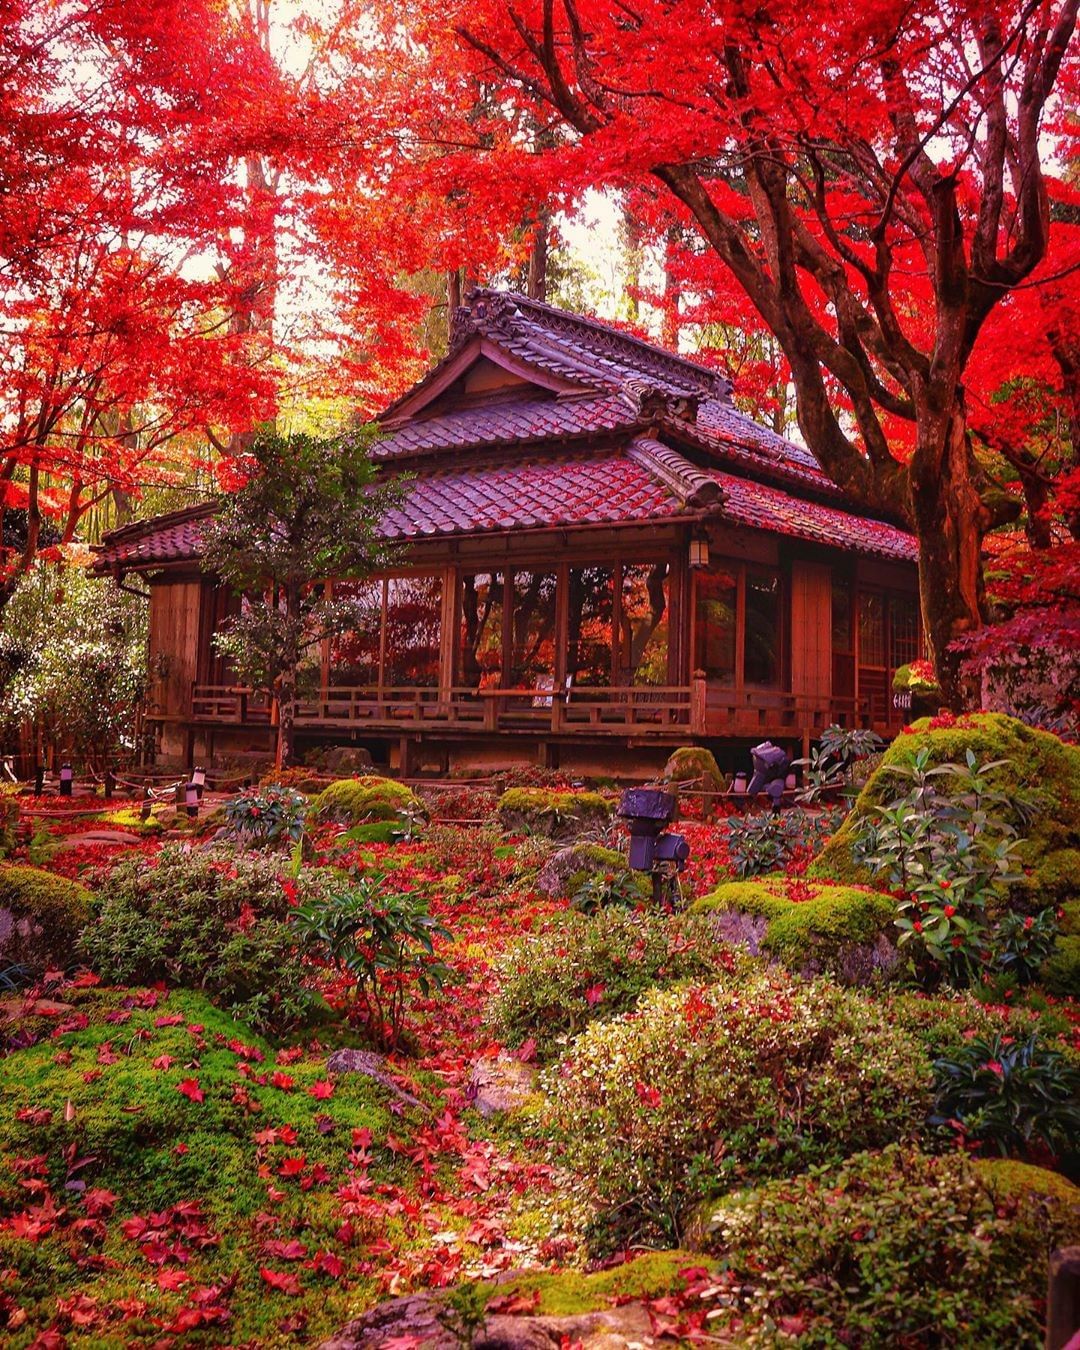 Japan Travel: We're seeing a lot more red popping up in Japan lately ...